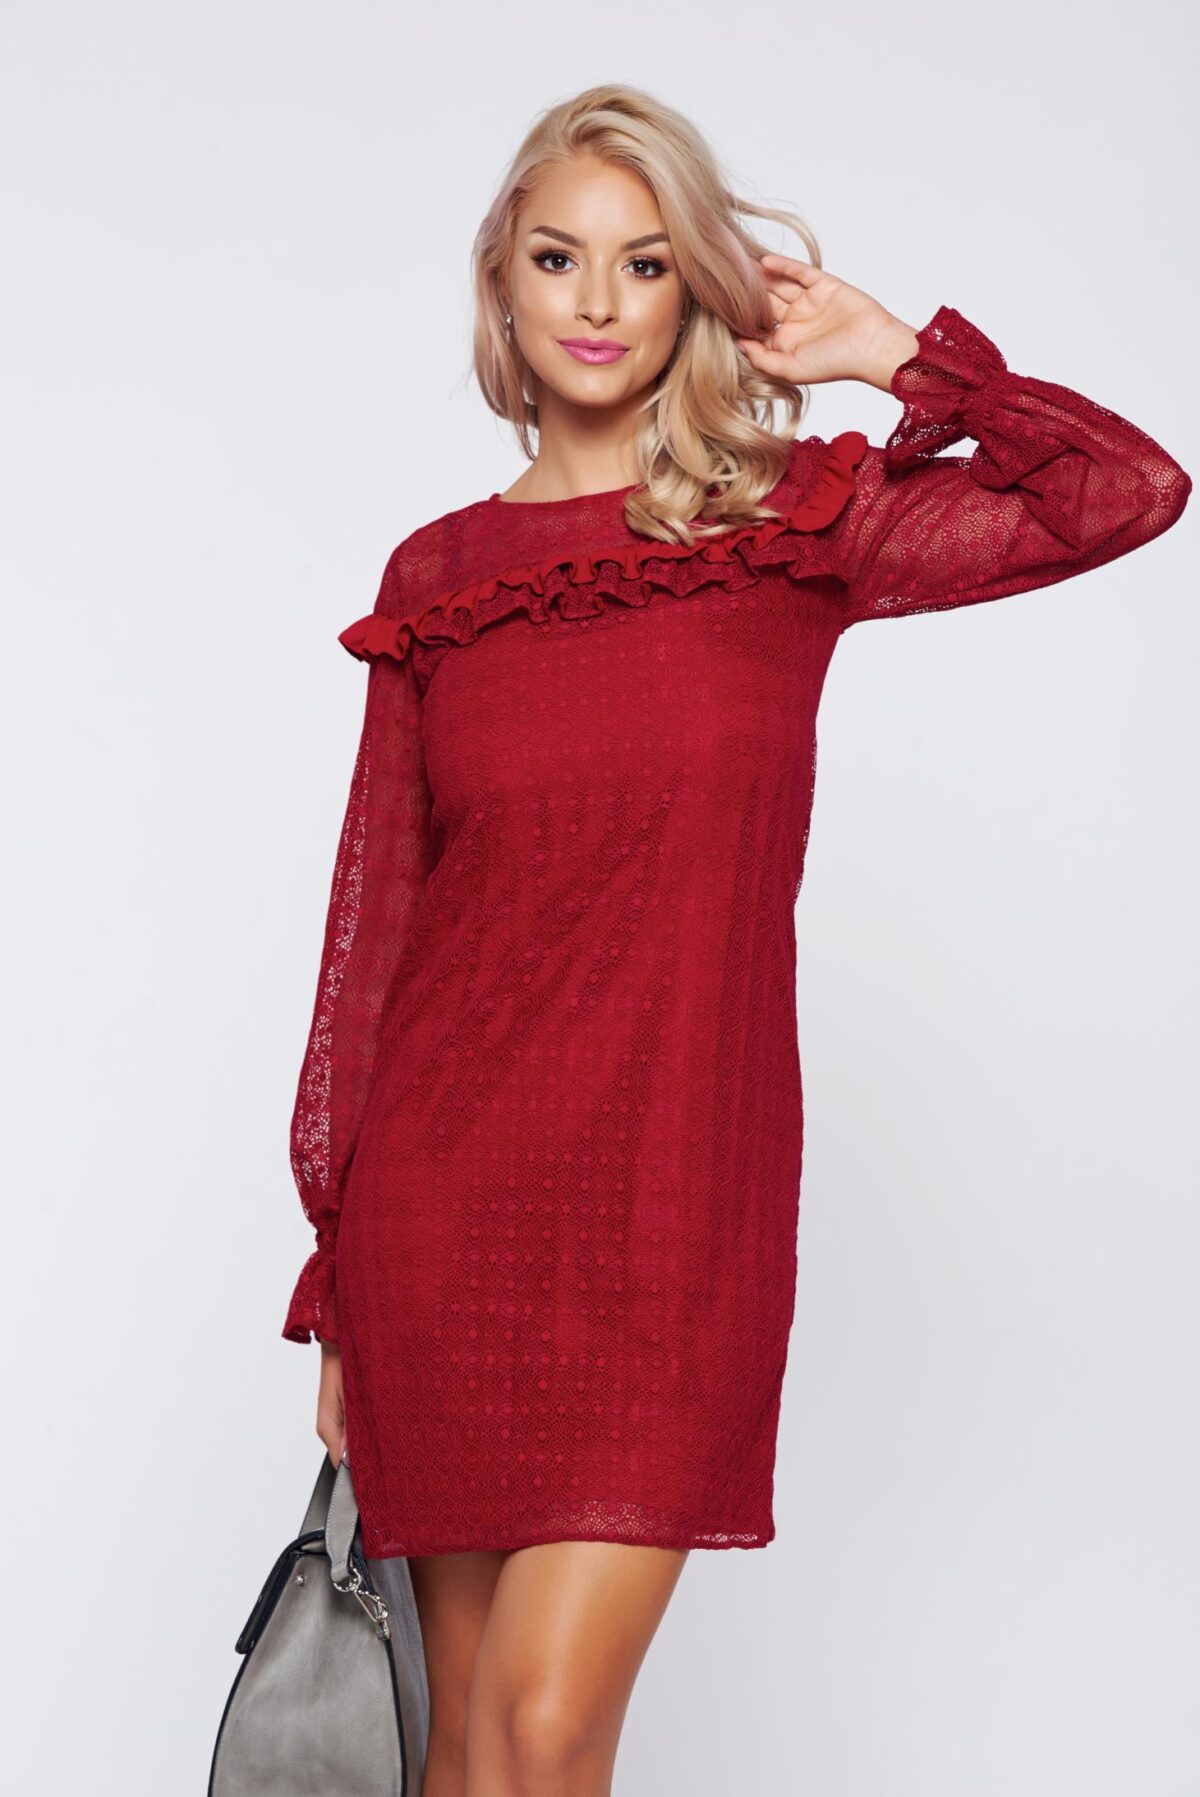 Burgundy elegant laced dress with ruffle details